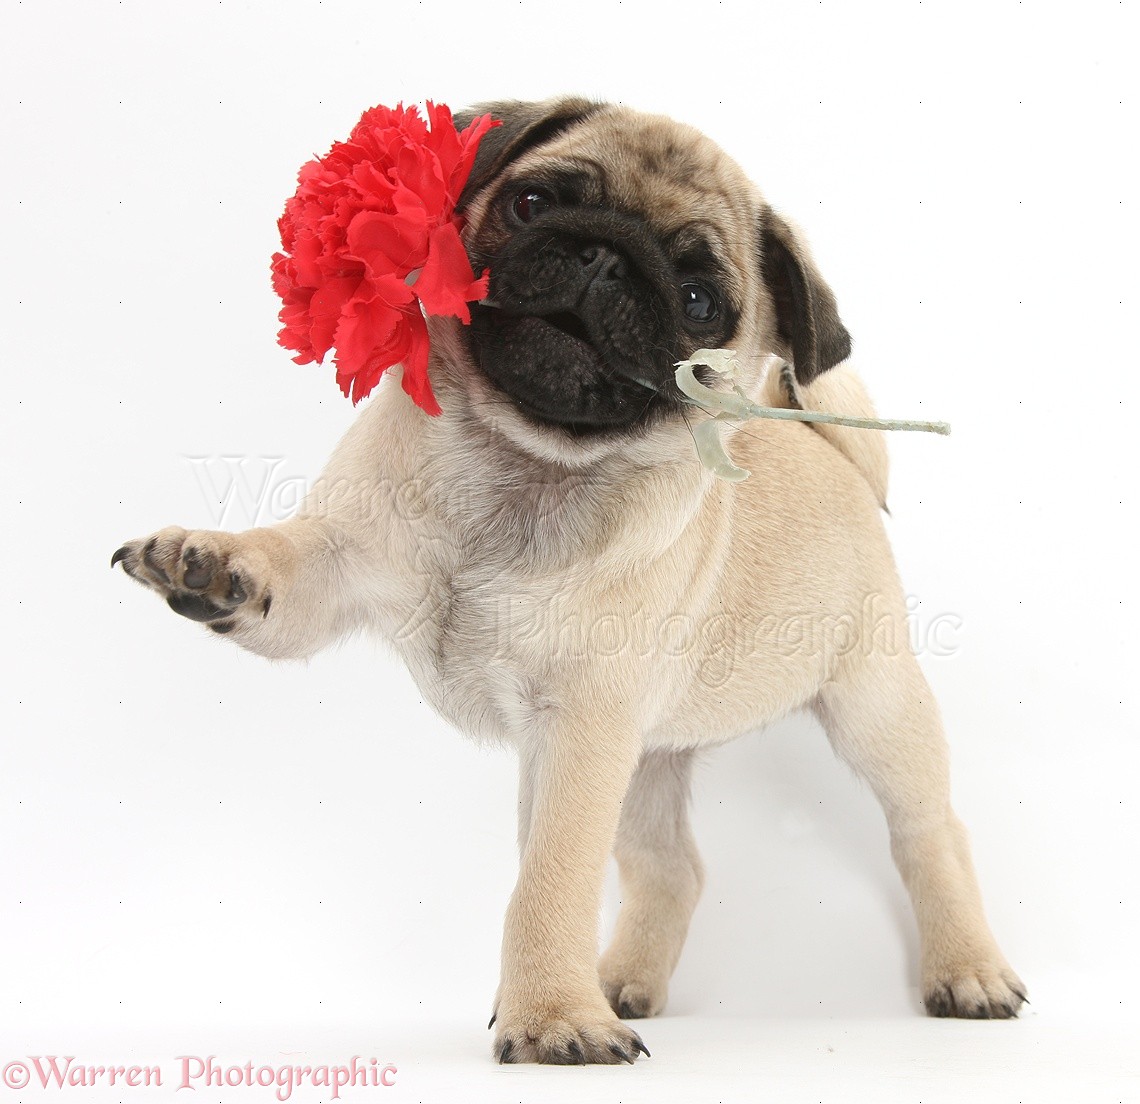 Wp38125 Fawn Pug Pup Weeks Old Holding A Red Carnation Flower